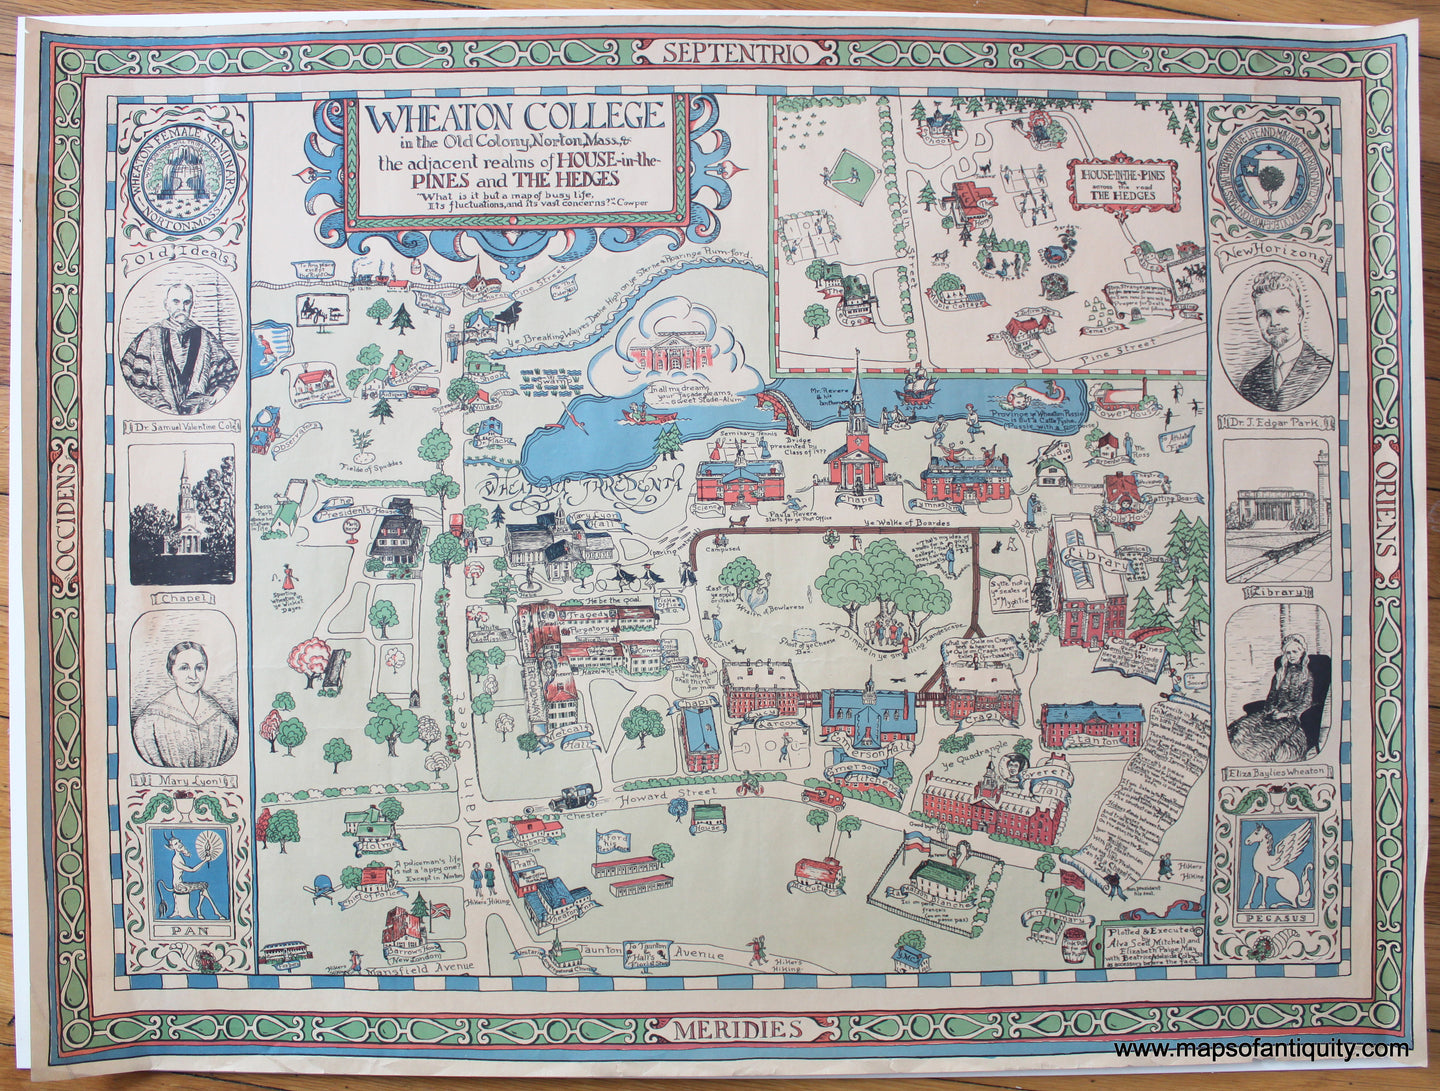 Antique-Printed-Color-Pictorial-Map-Wheaton-College-in-the-Old-Colony-Norton-Mass.-&-the-adjacent-realms-of-House-in-the-Pines-and-The-Hedges-1929-Alva-Scott-Mitchell-and-Elizabeth-Paige-May---1900s-20th-century-Maps-of-Antiquity